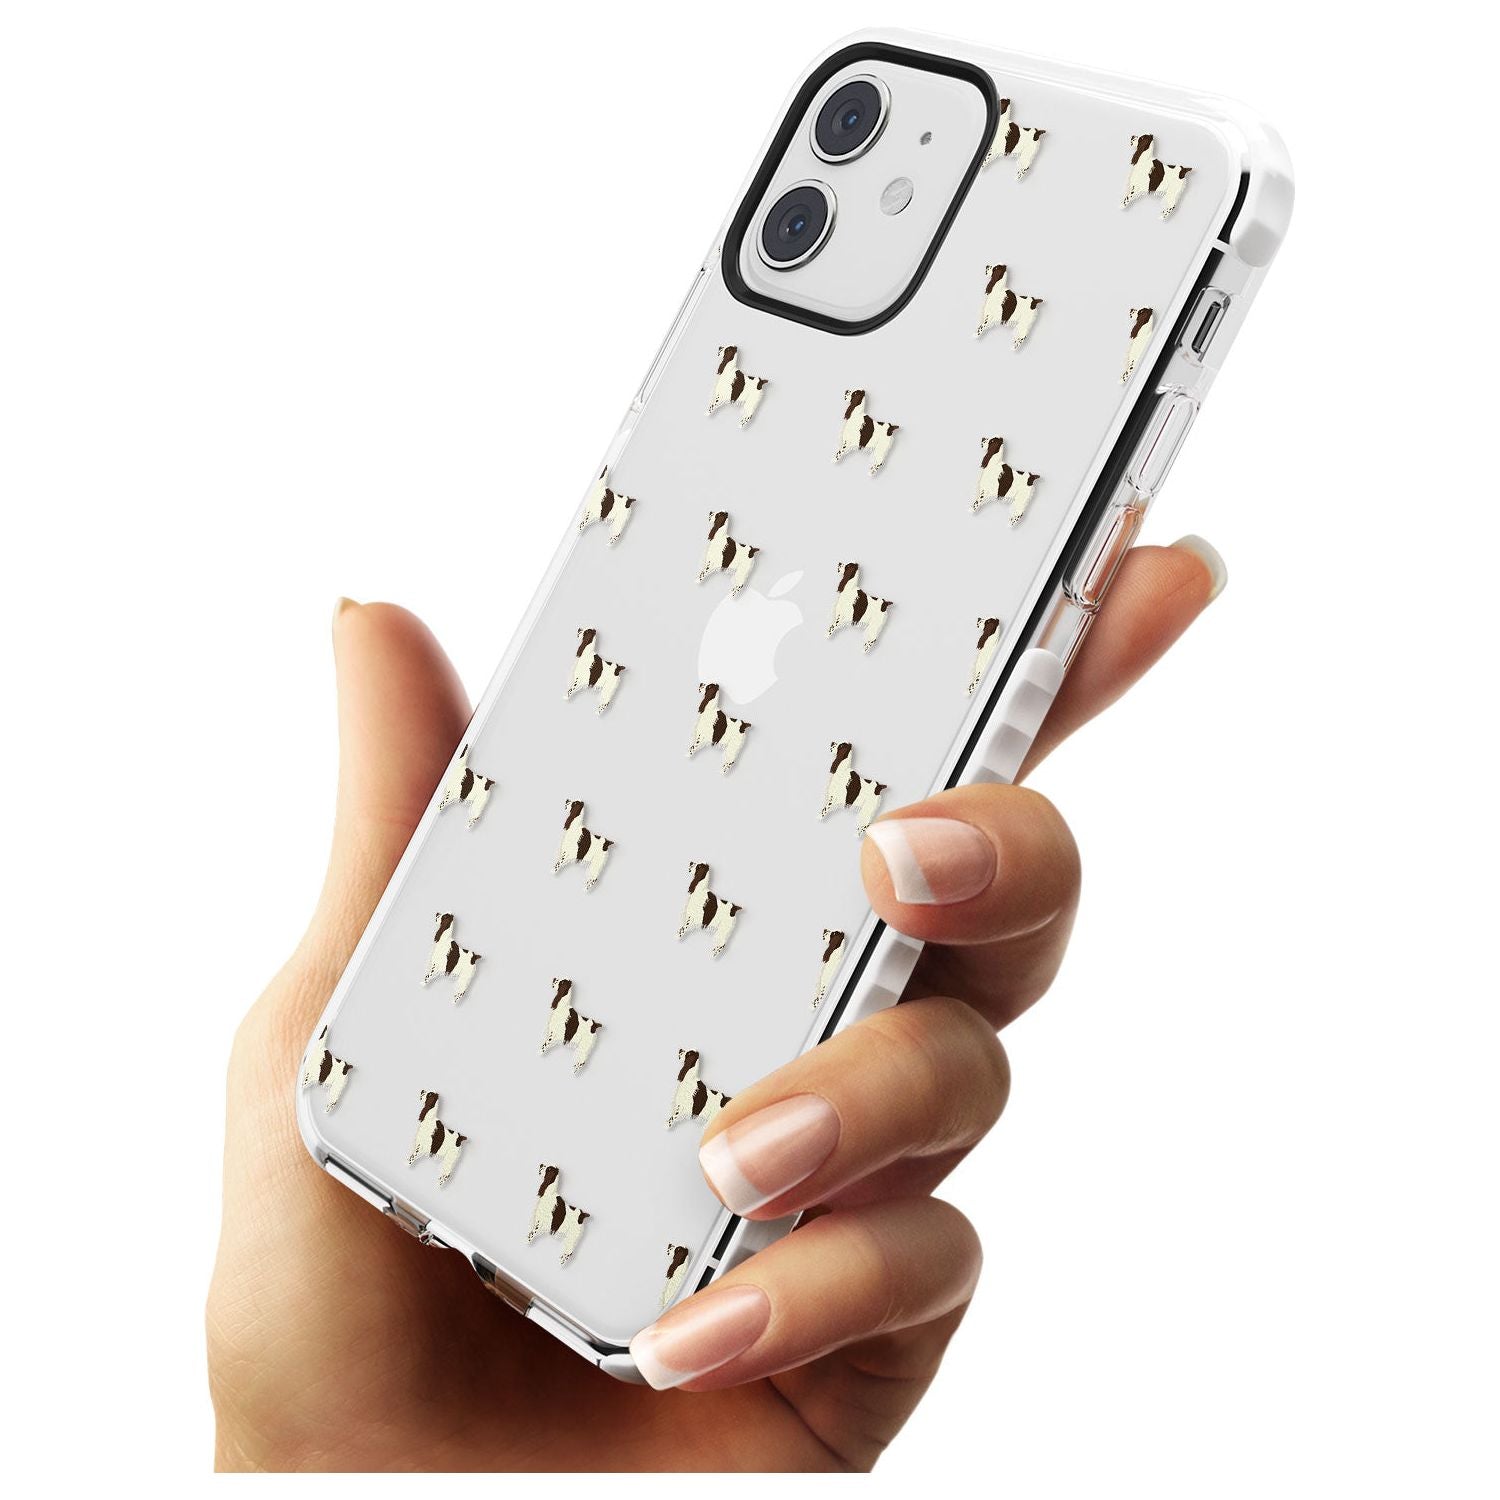 English Springer Spaniel Dog Pattern Clear Impact Phone Case for iPhone 11